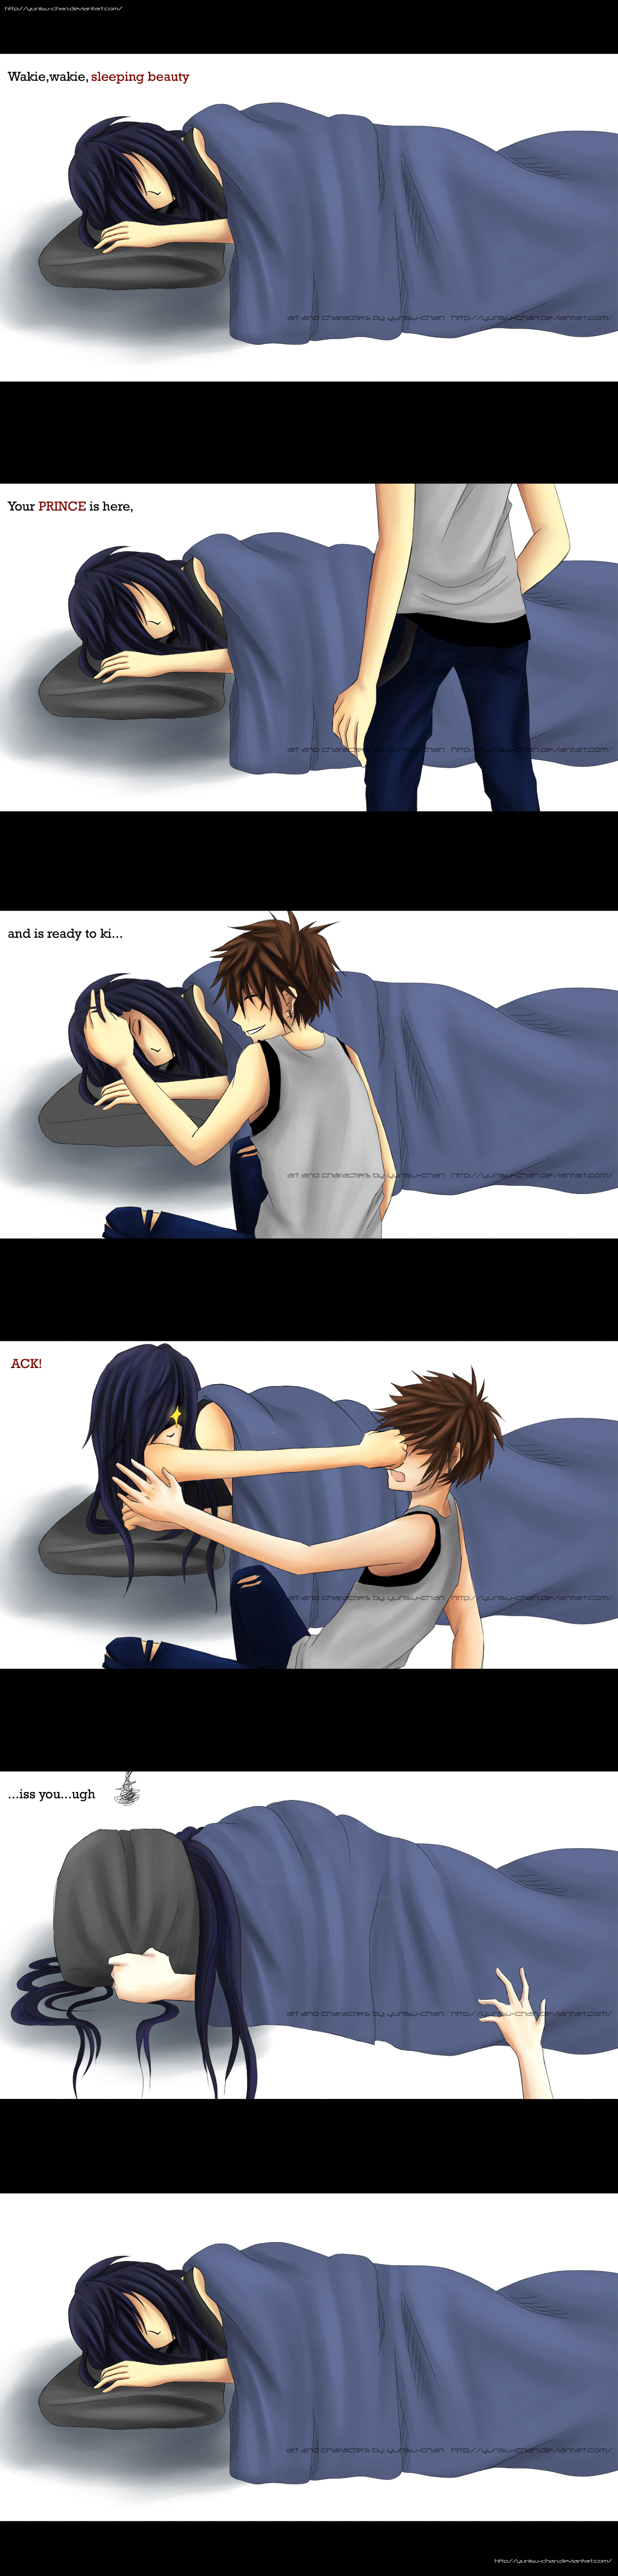 Why is it that a lot of Anime/Manga characters sleep with the blanket  Horizontally instead of vertically? : r/manga